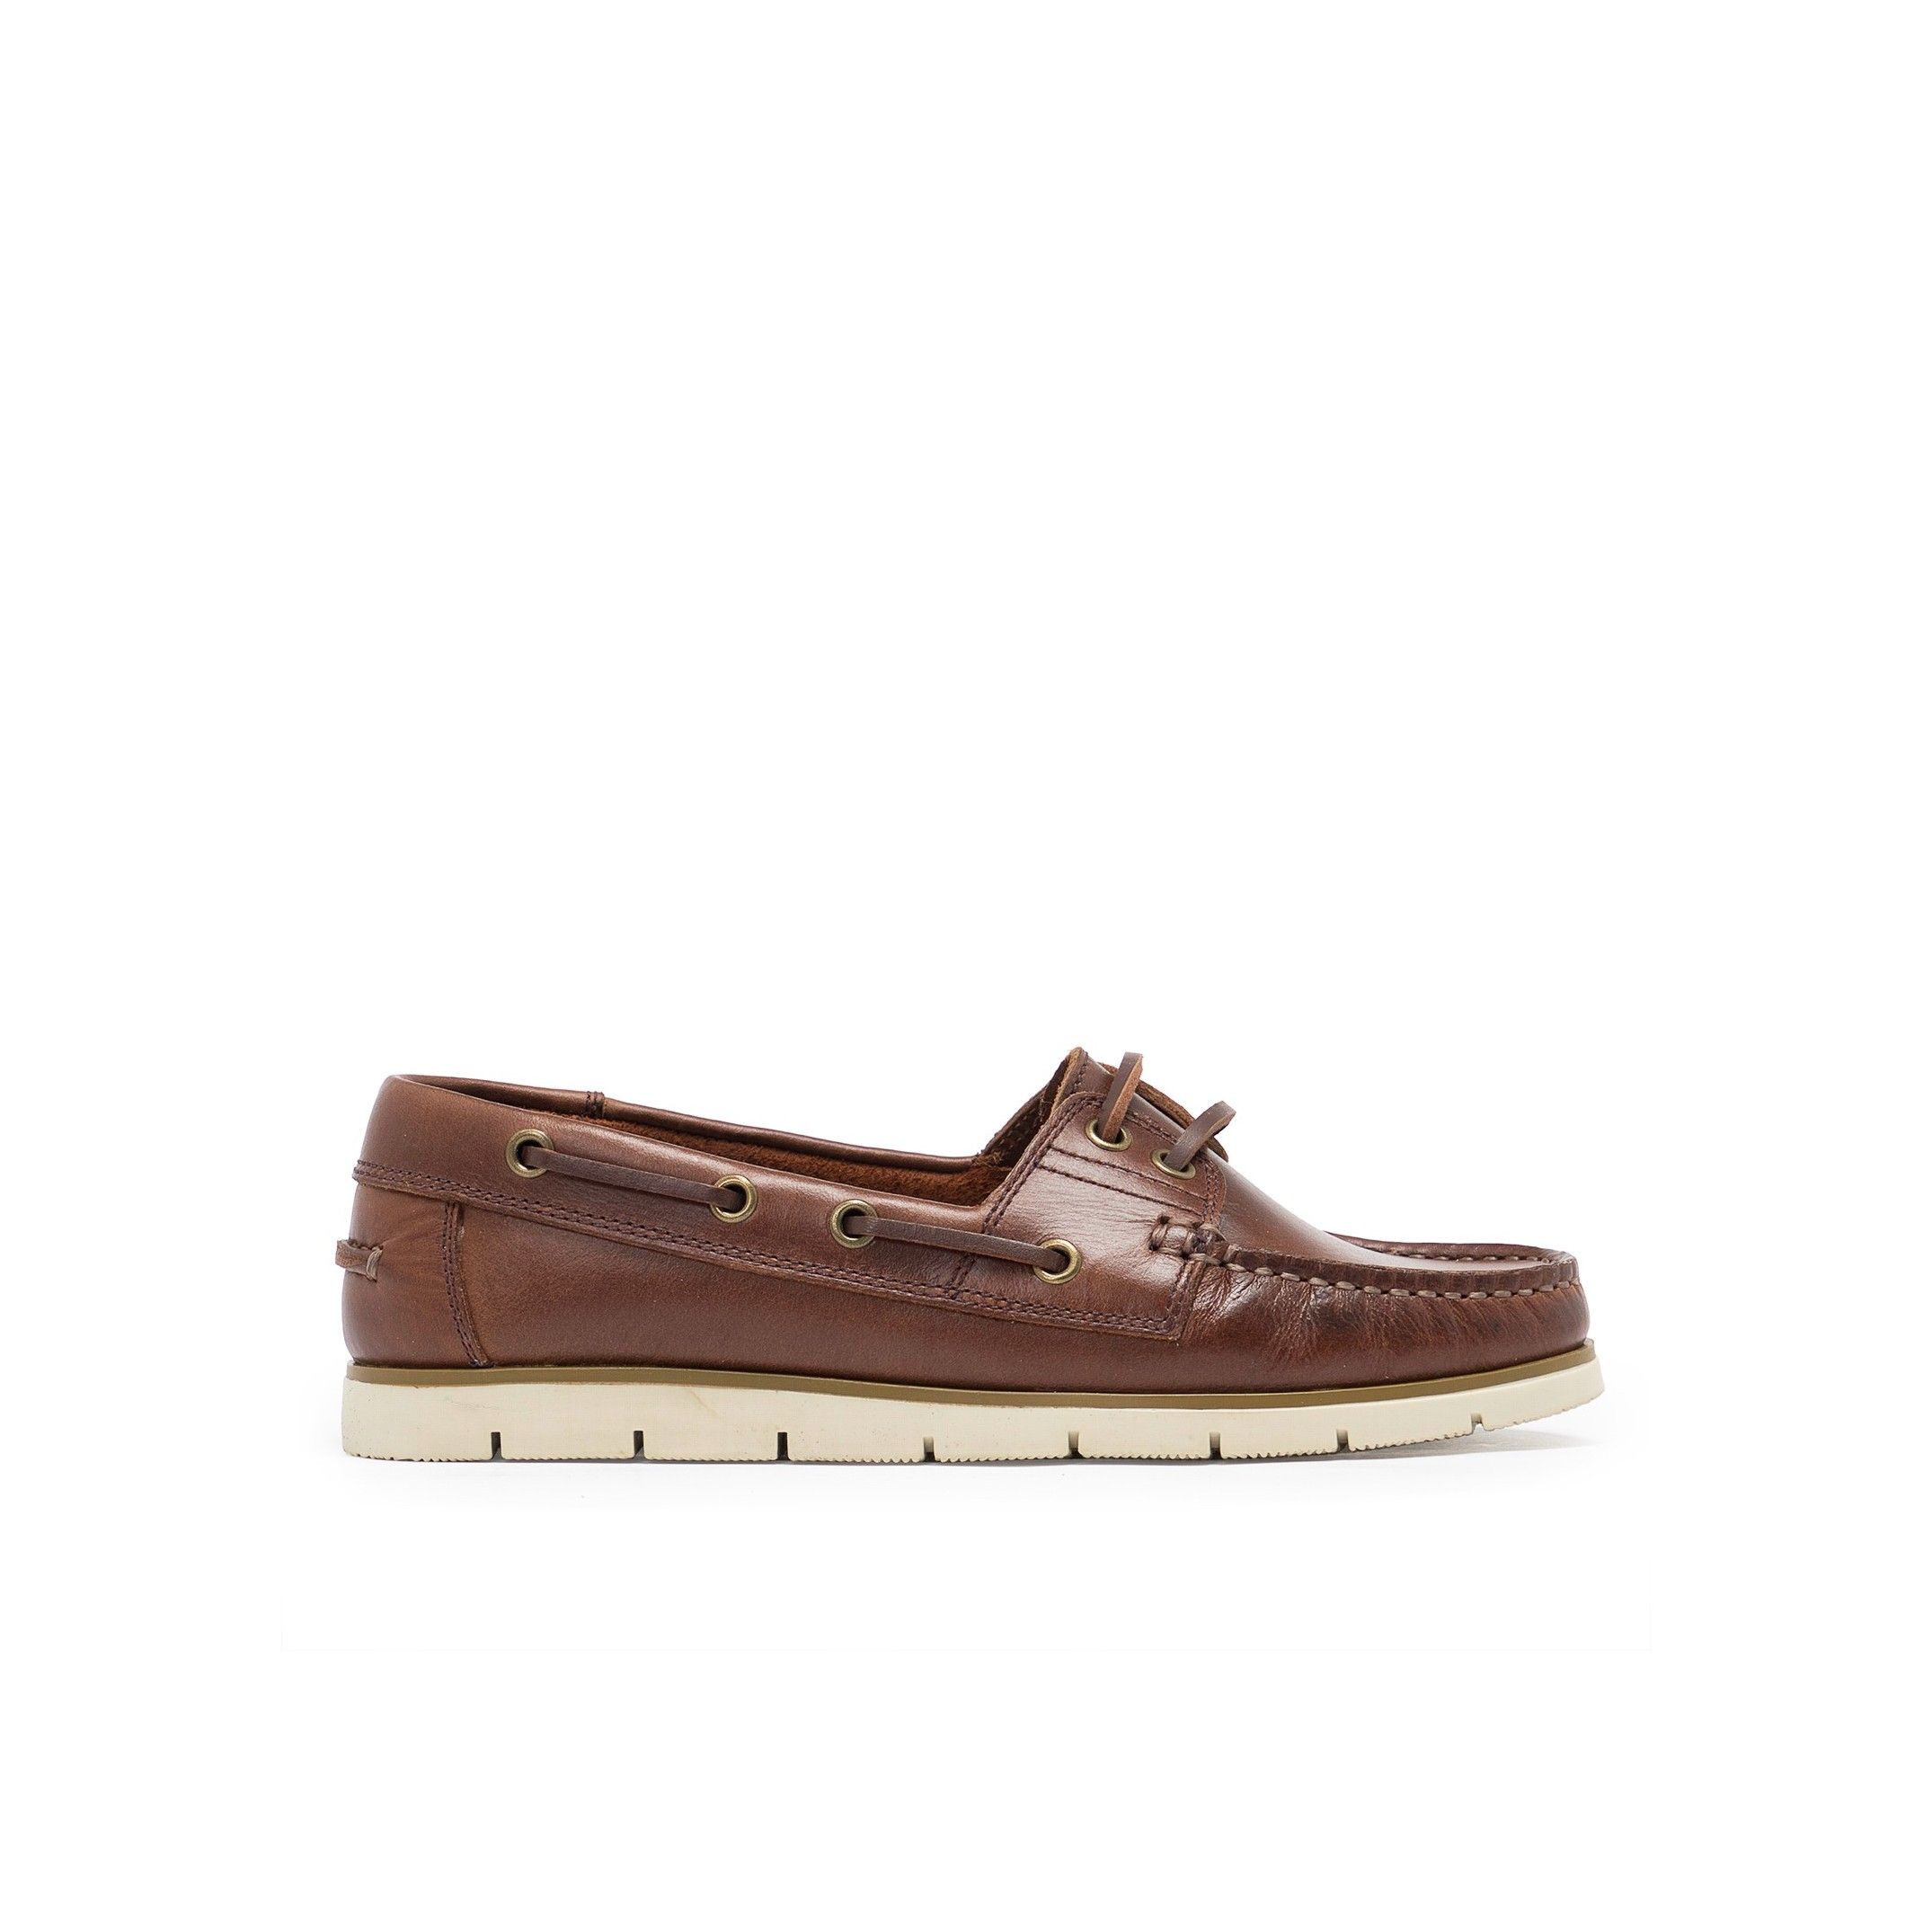 Leather boat shoe by Son Castellanisimos. Closure: Laces. Upper: leather. Inner: leather. Insole: leather. Sole: non-slip. Heel: 1,5 cm. Made in Spain.